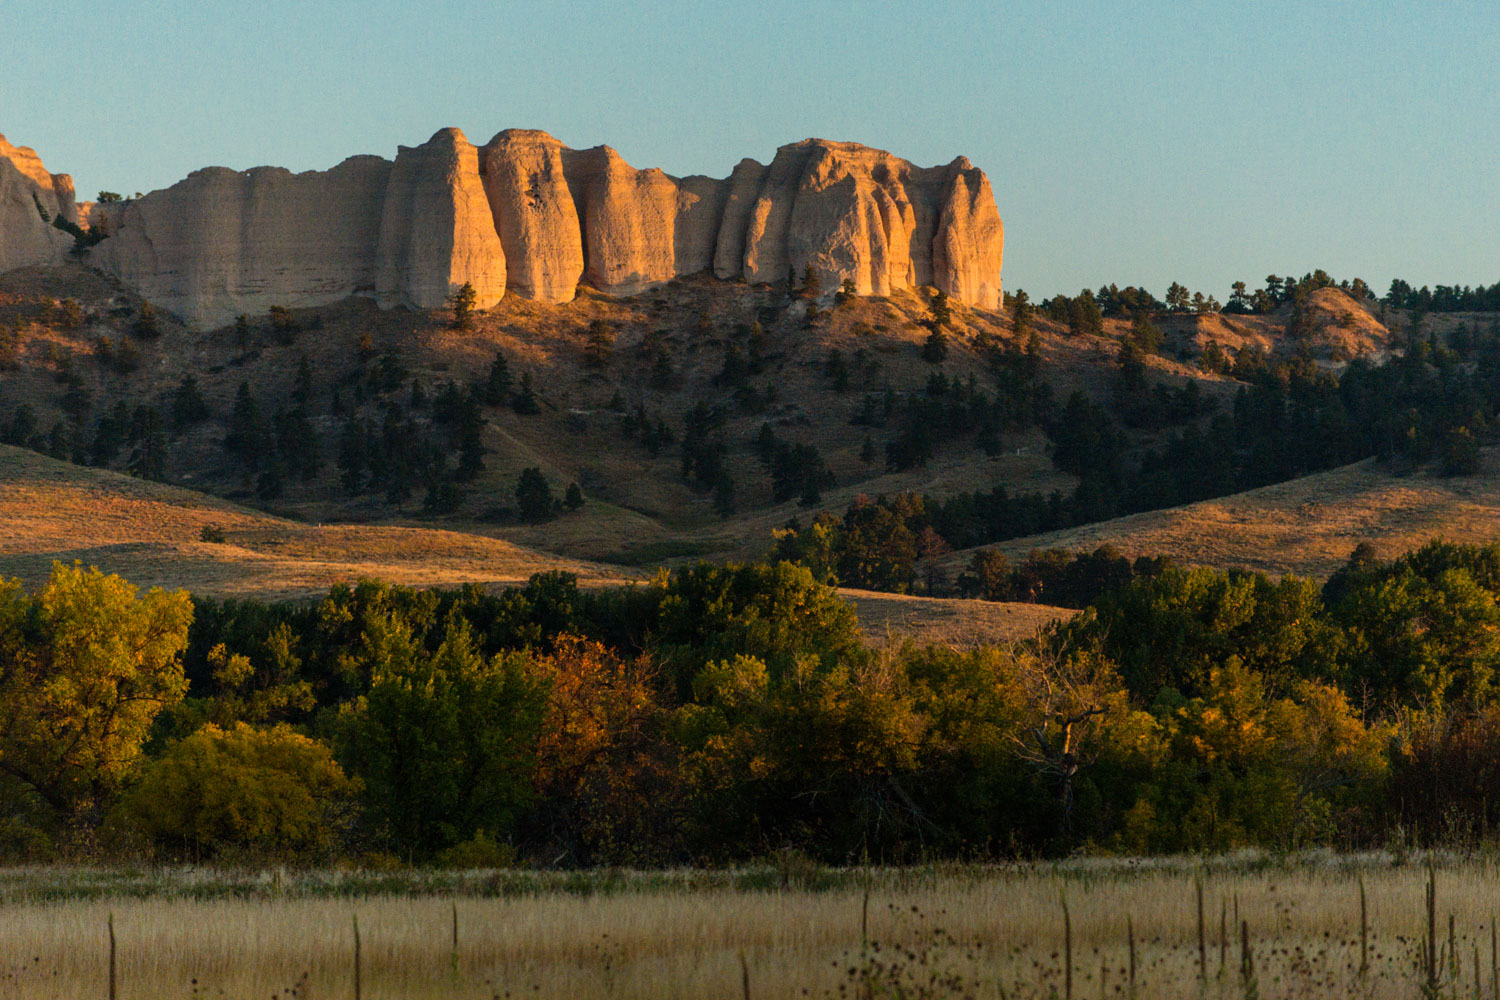 Image of Cheyenne Buttes outside Fort Robinson.